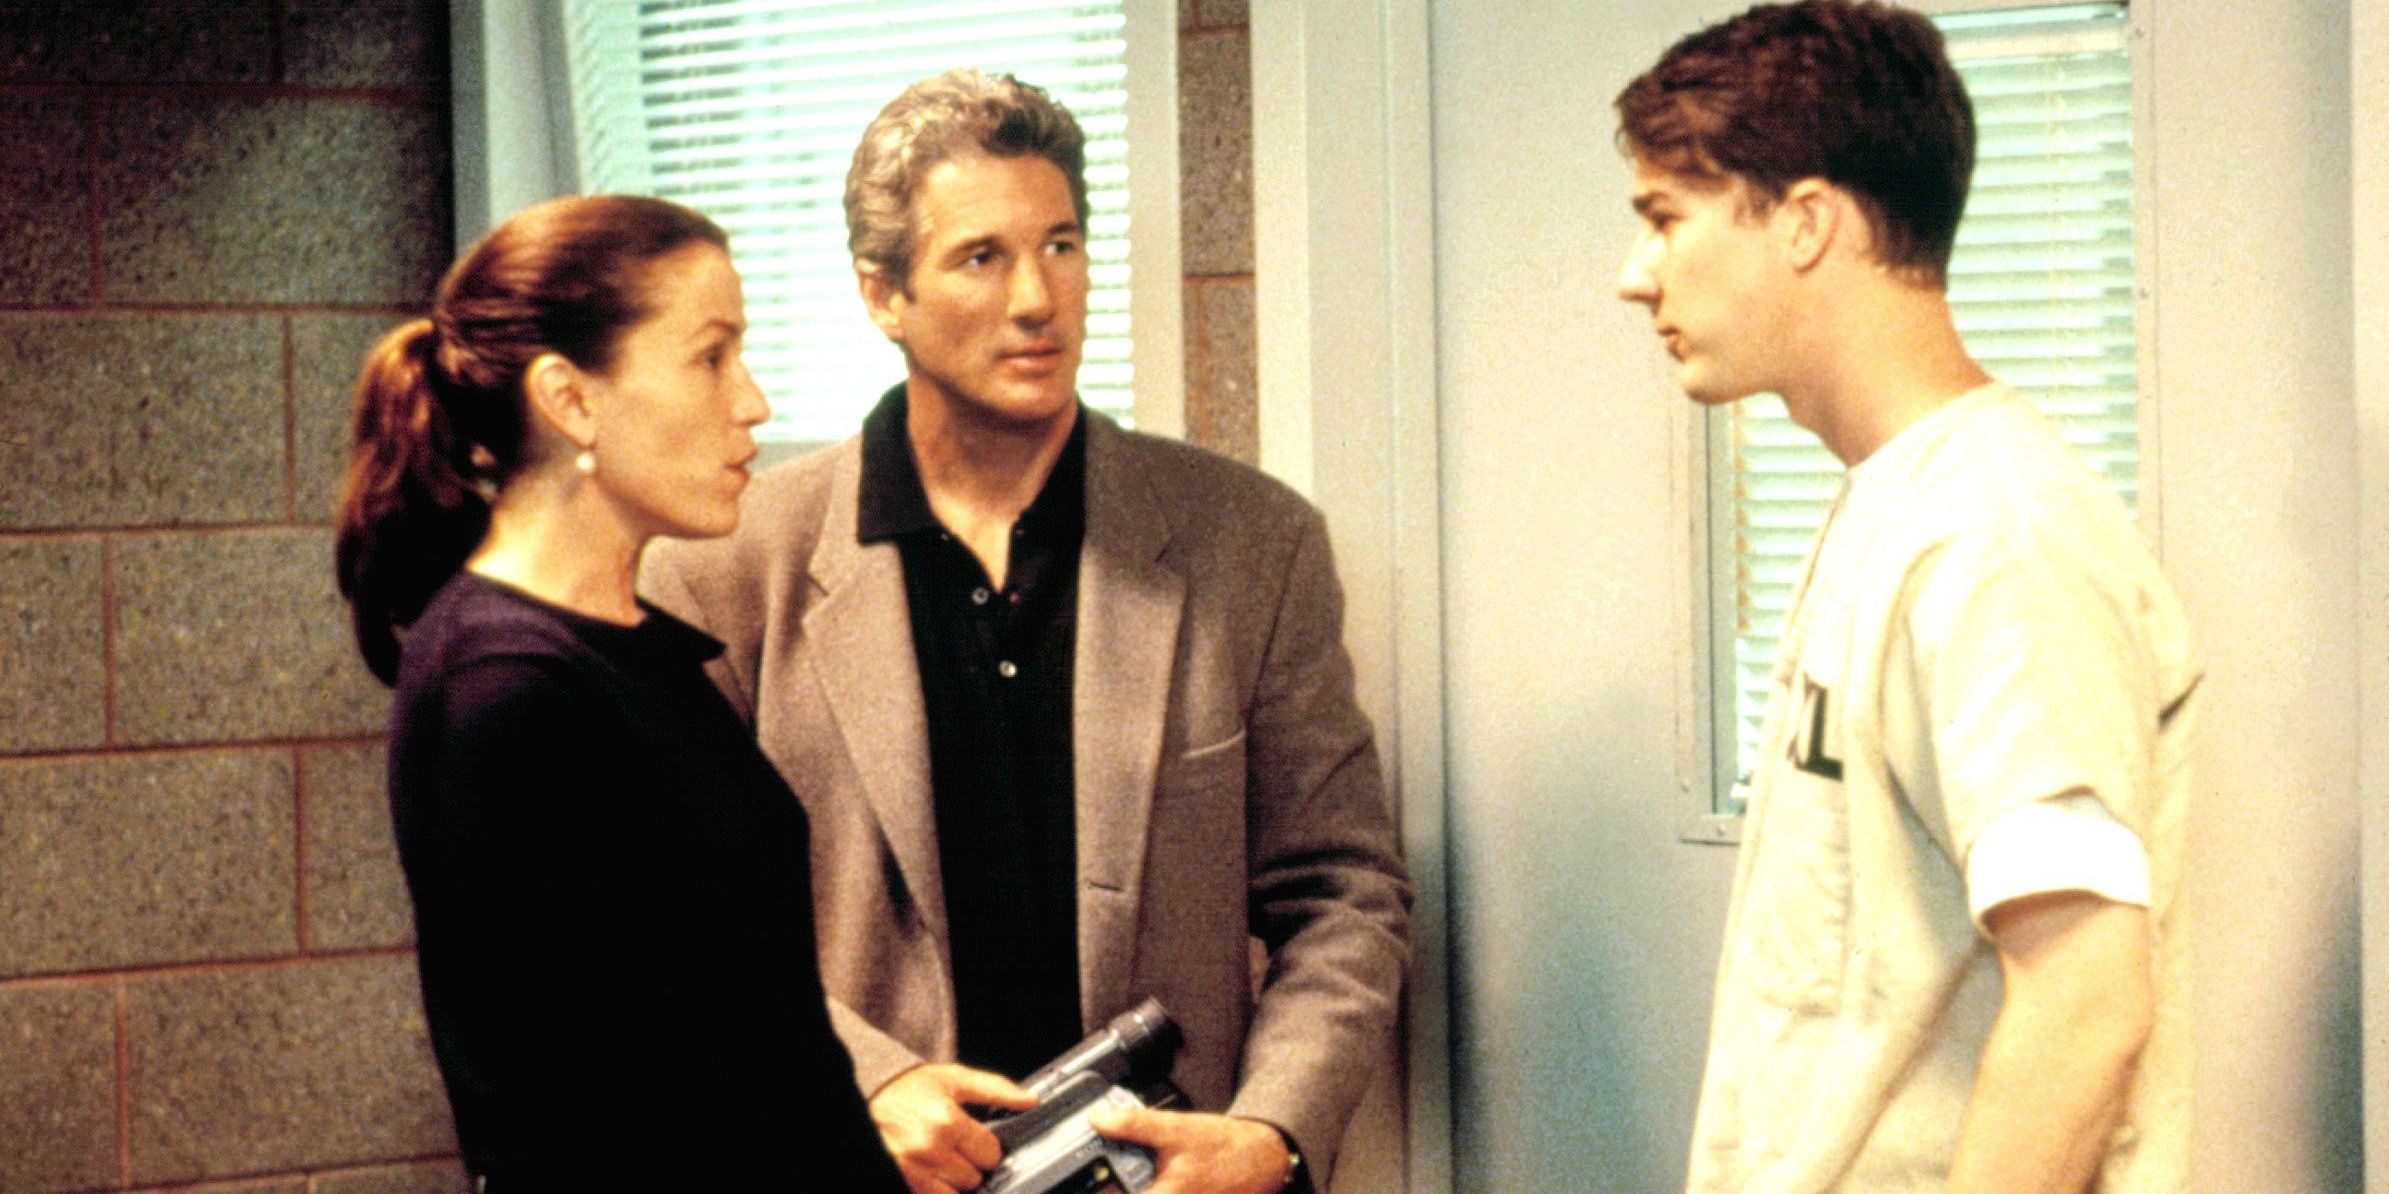 Edward Norton and Richard Gere talk with a woman in Primal Fear